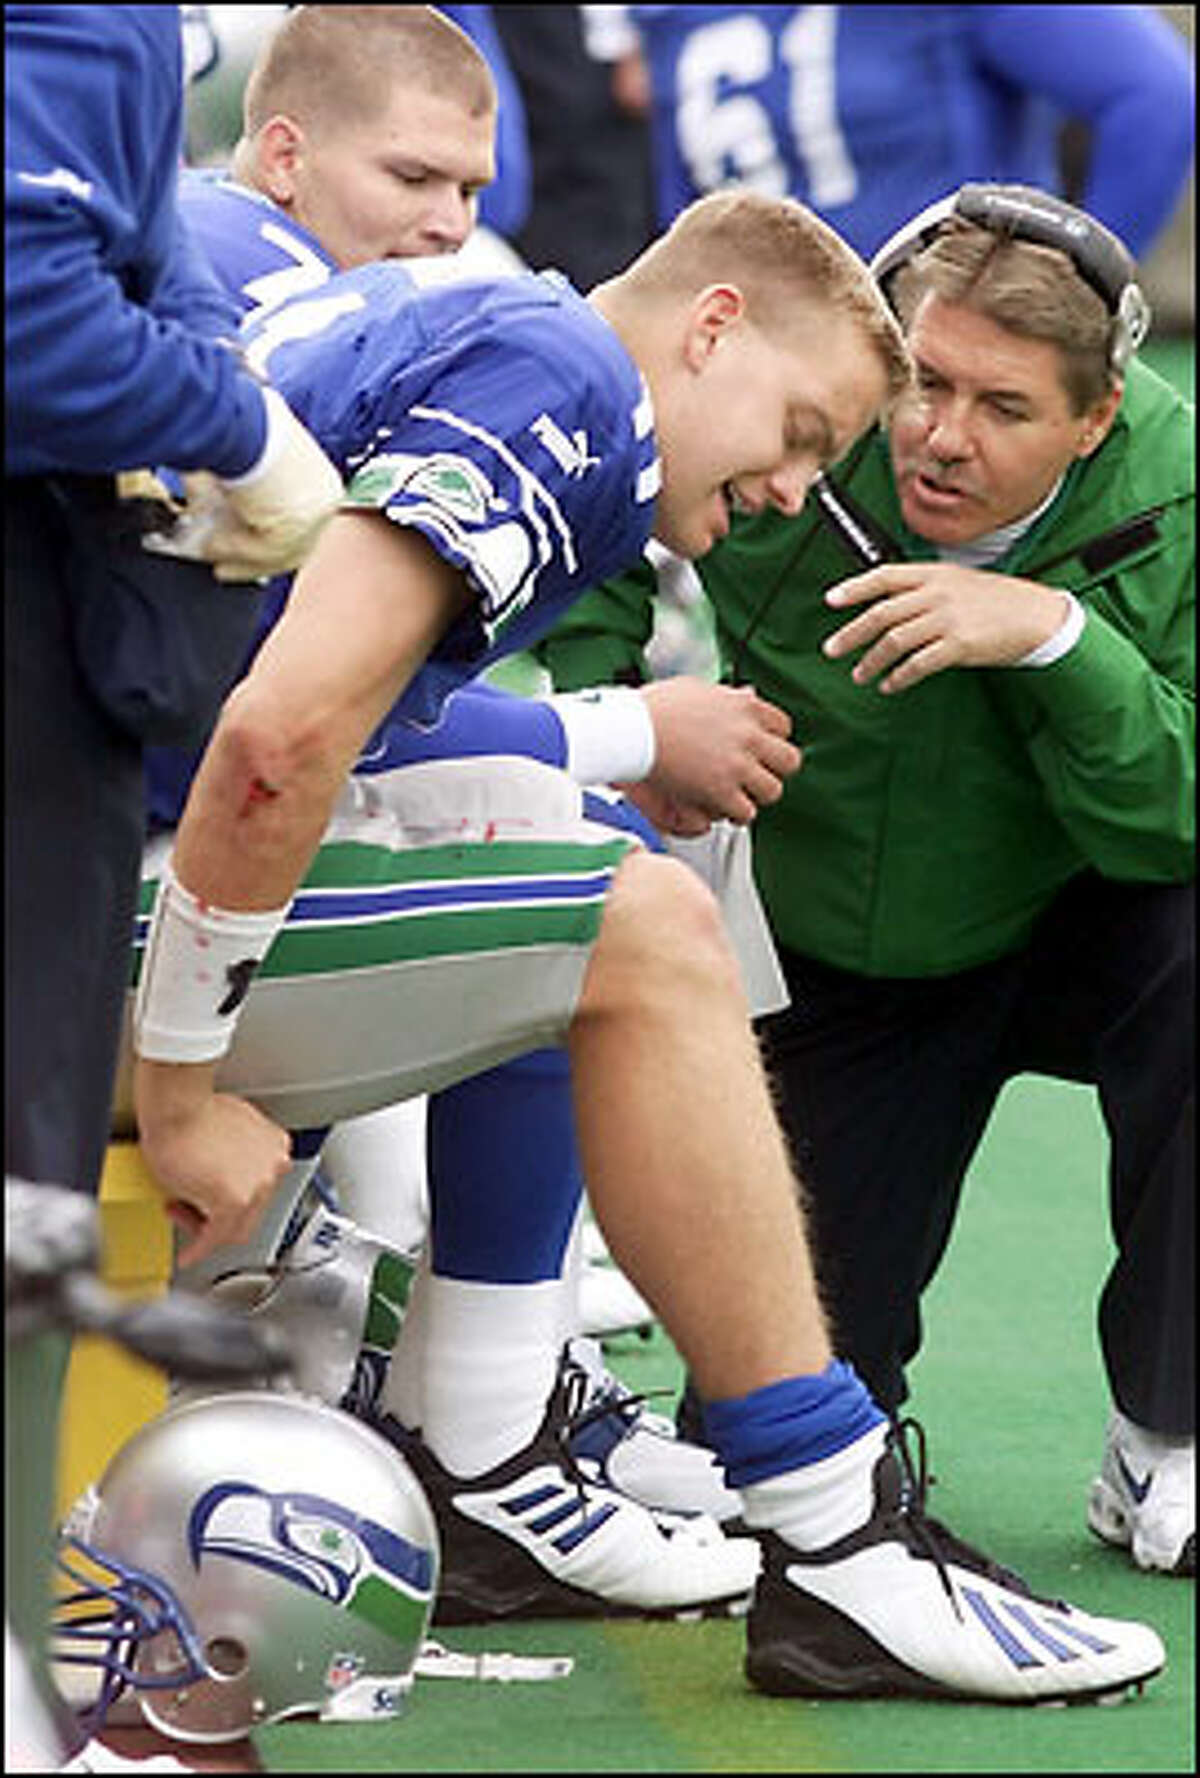 Seahawks QB Brock Huard is checked for a knee injury, one that forced him twice to leave the game.